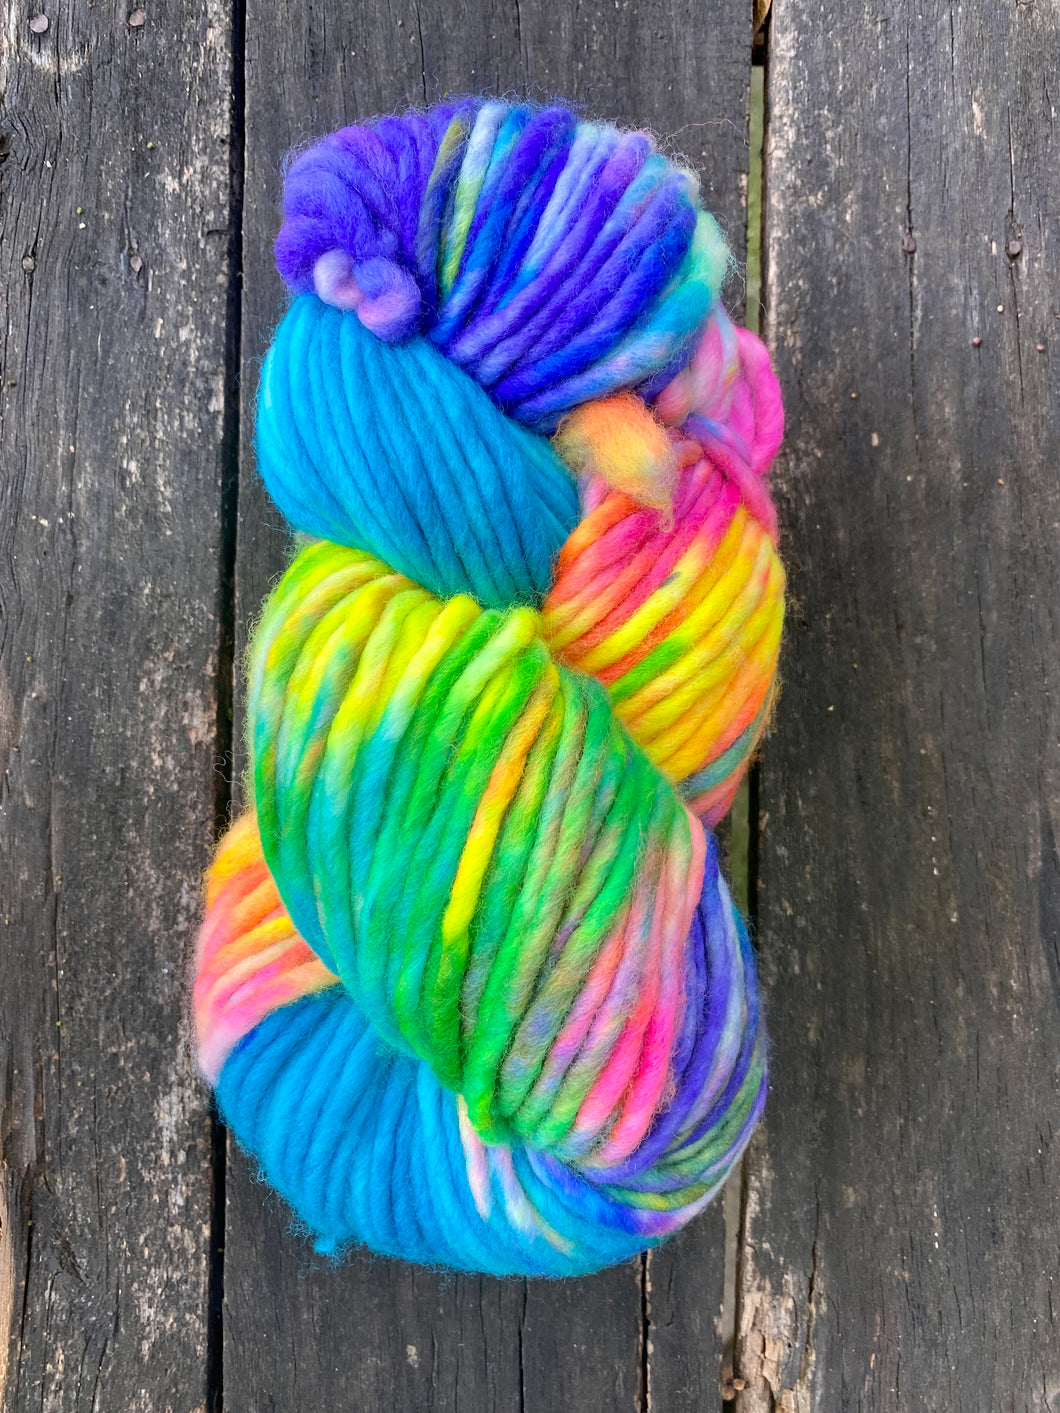 Honey and Clover Knits hand dyed merino wool yarn colorful indie yarn super bulky Rainbow Brite